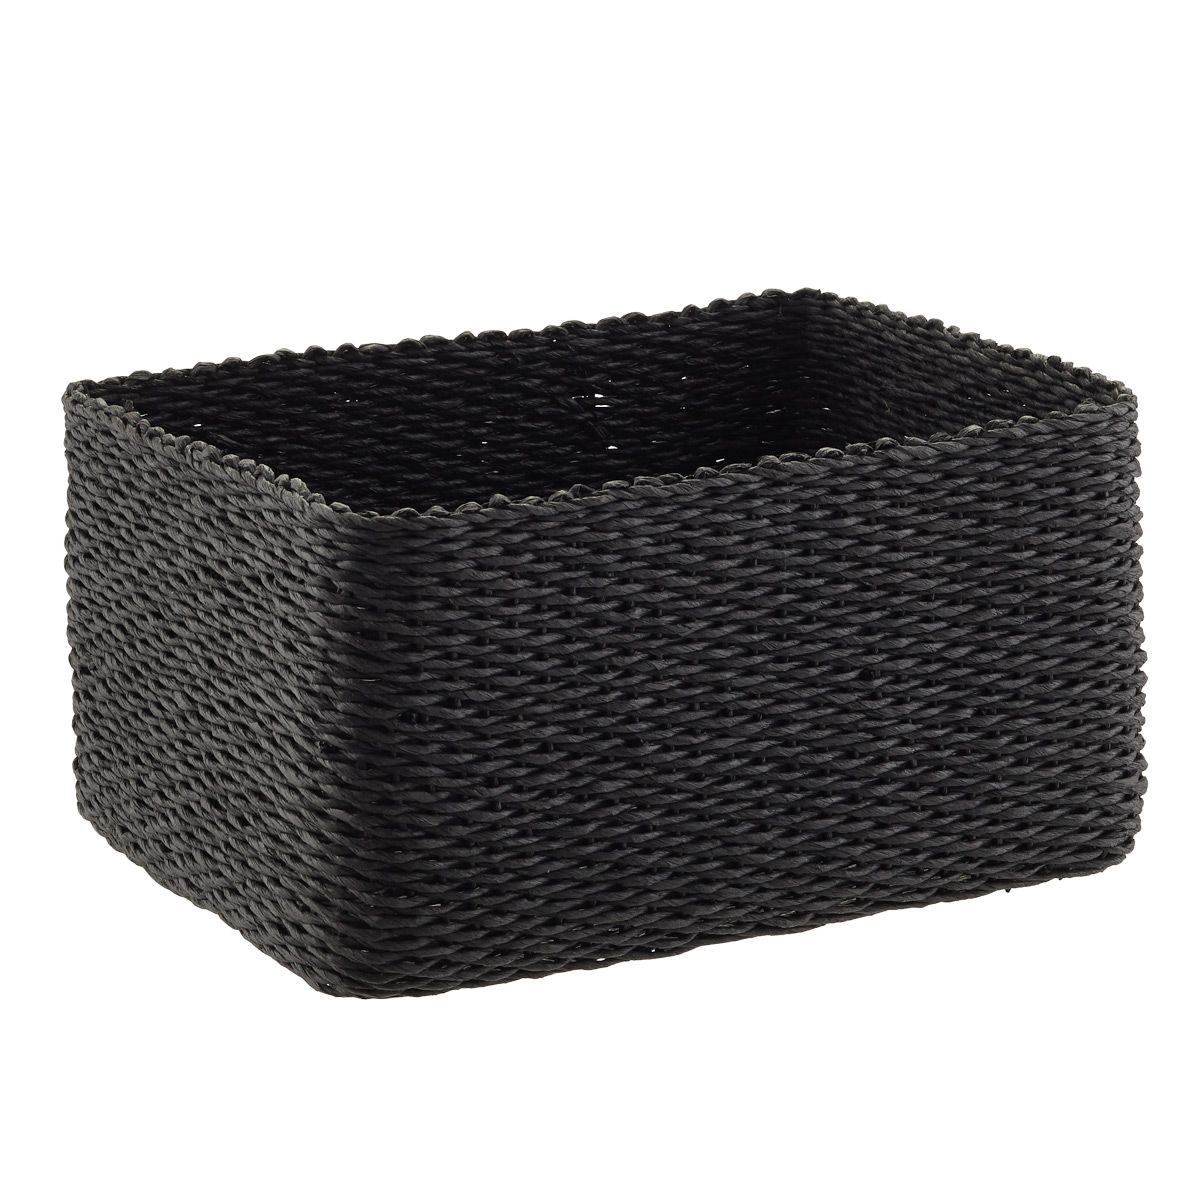 Woven Paper Bins | The Container Store